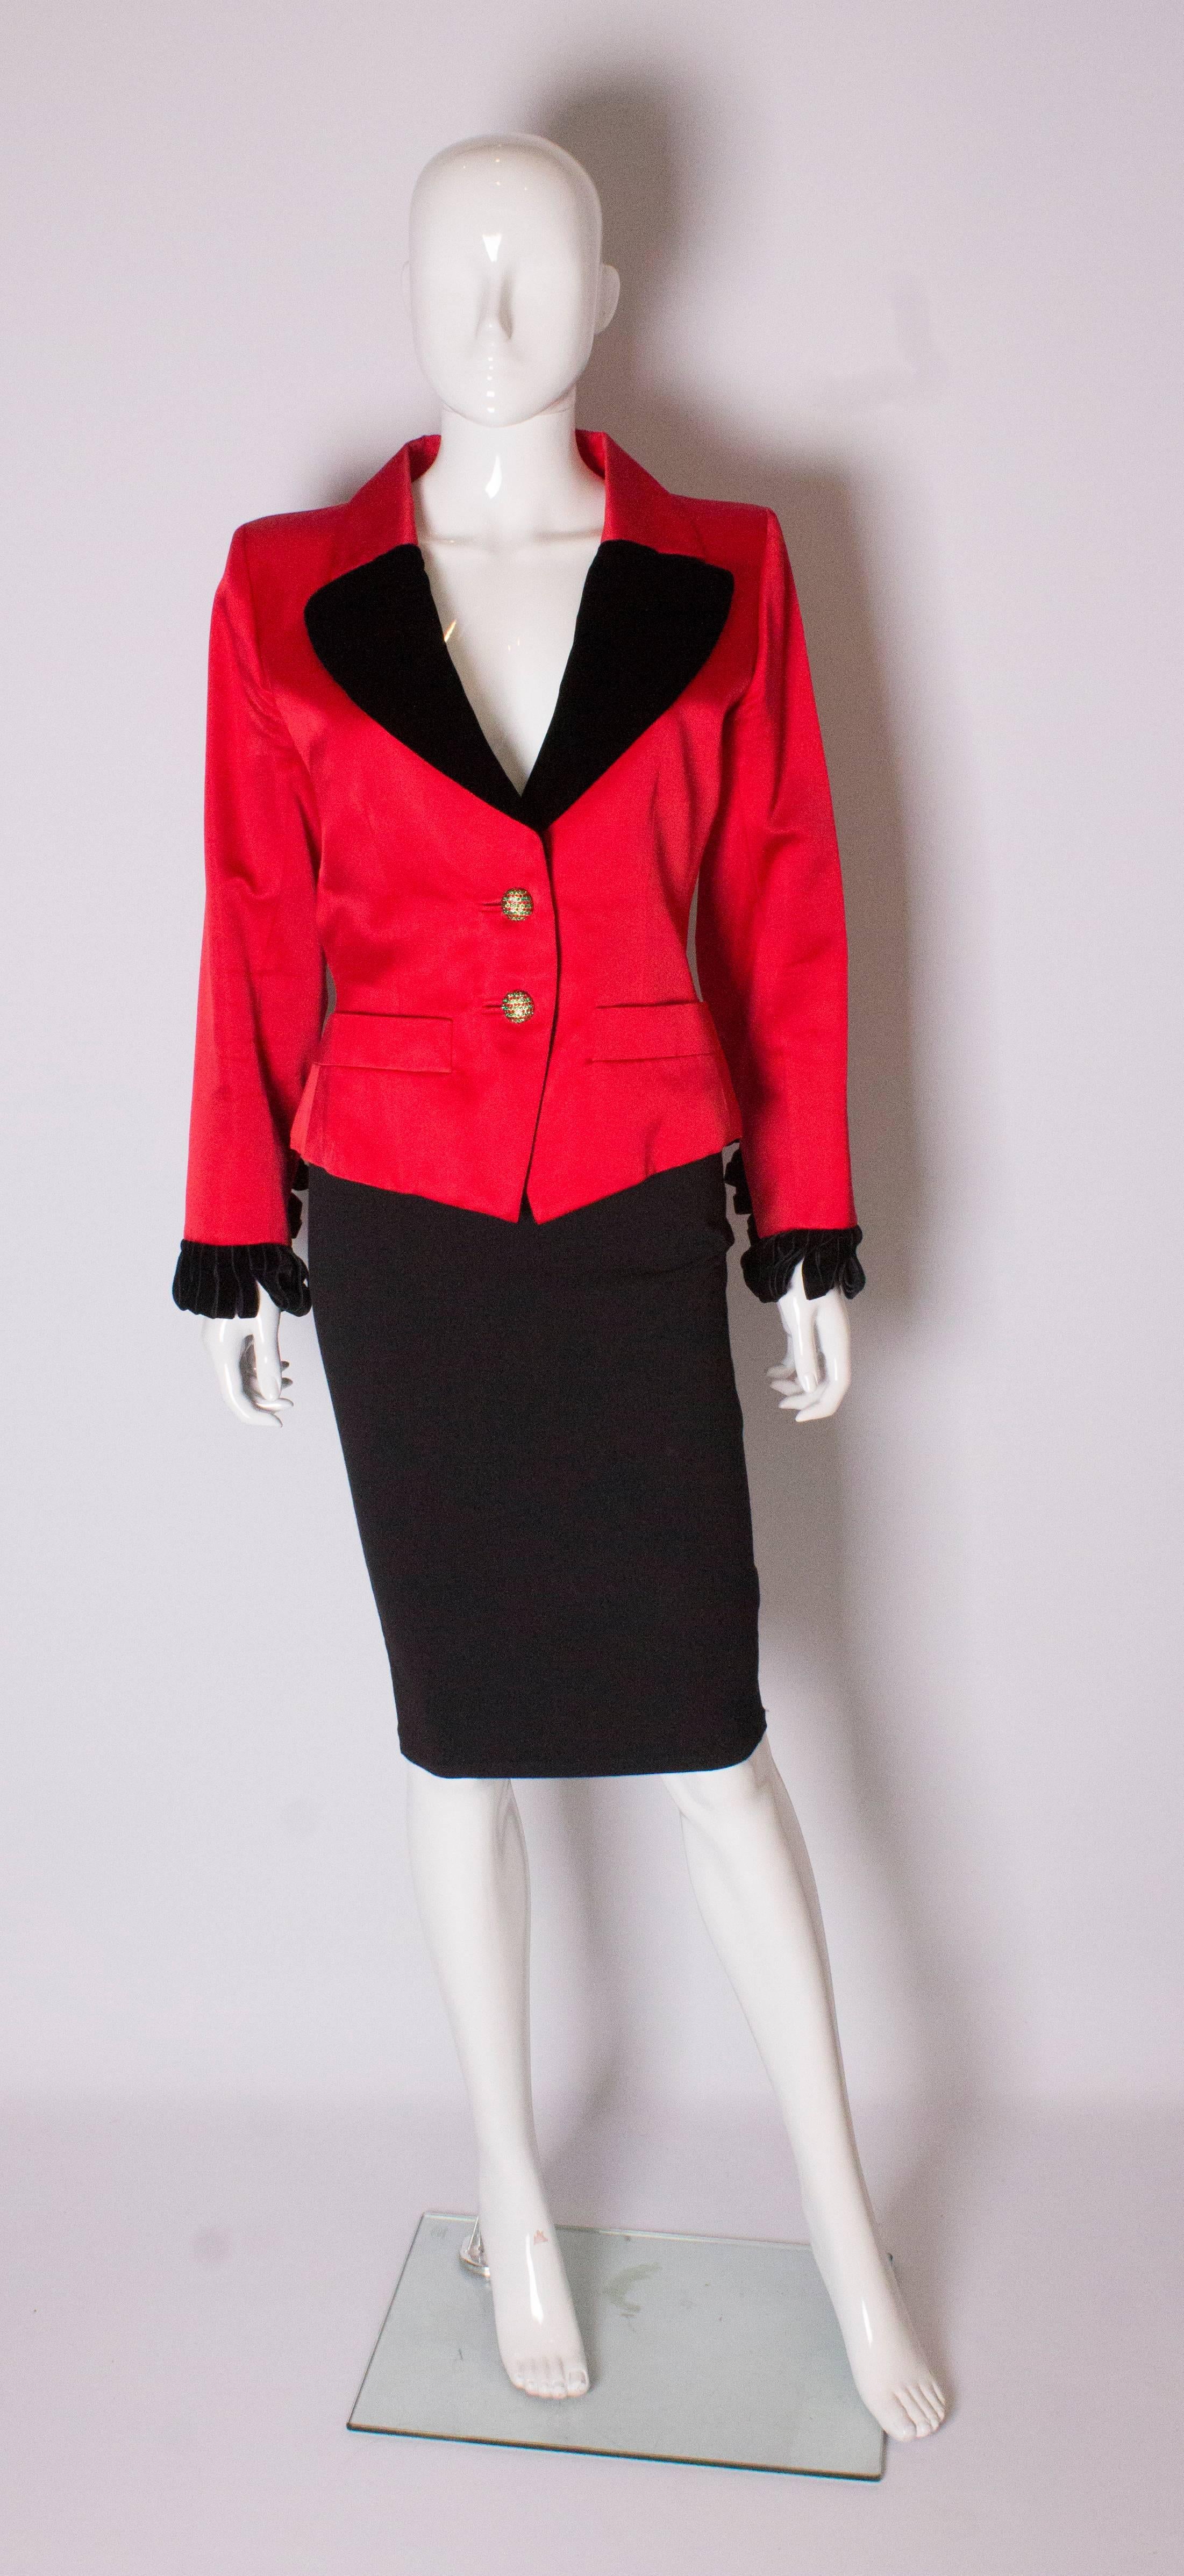 A red evening jacket by Yves Saint Laurent Rive Gauche. The red jacket has a red and black collar with black velvet frill cuffs and velvet ties at the back. It has a two button opening and pockets at waist level.